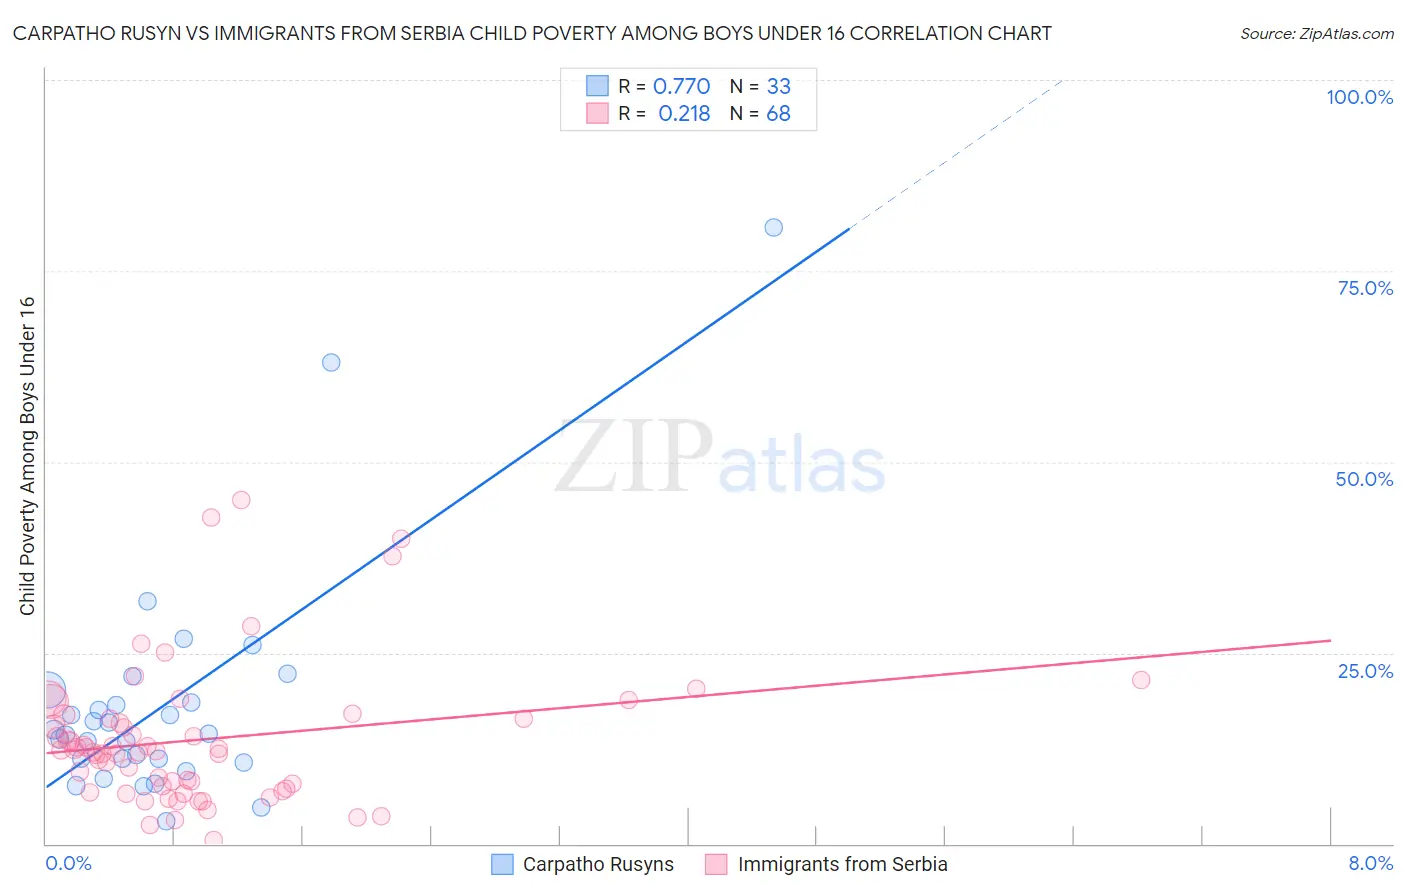 Carpatho Rusyn vs Immigrants from Serbia Child Poverty Among Boys Under 16